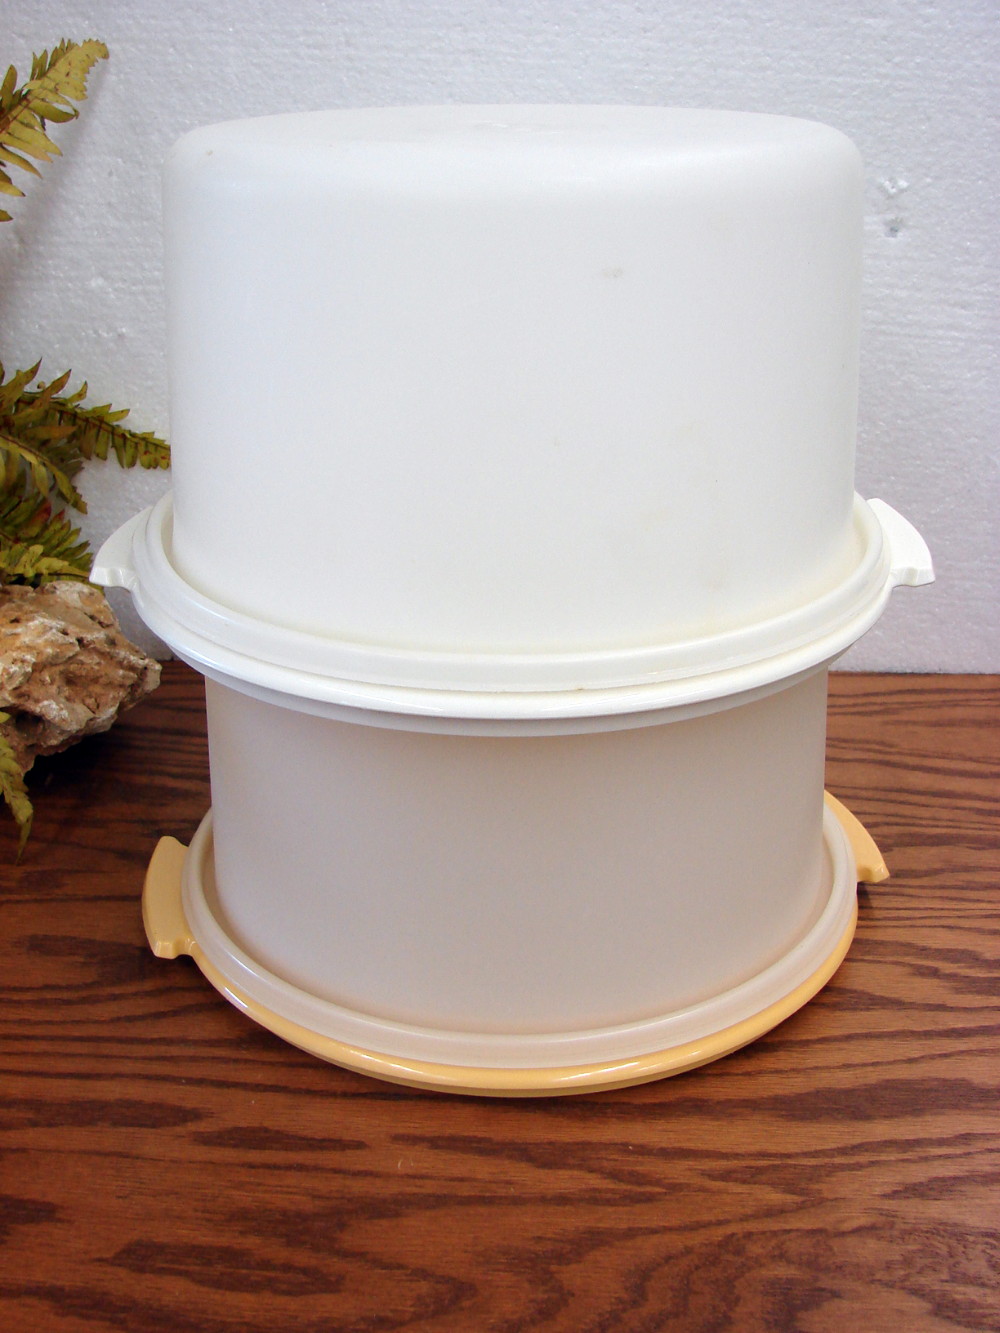 Vintage Tupperware Large Round Container & Lid. White. Cake Taker